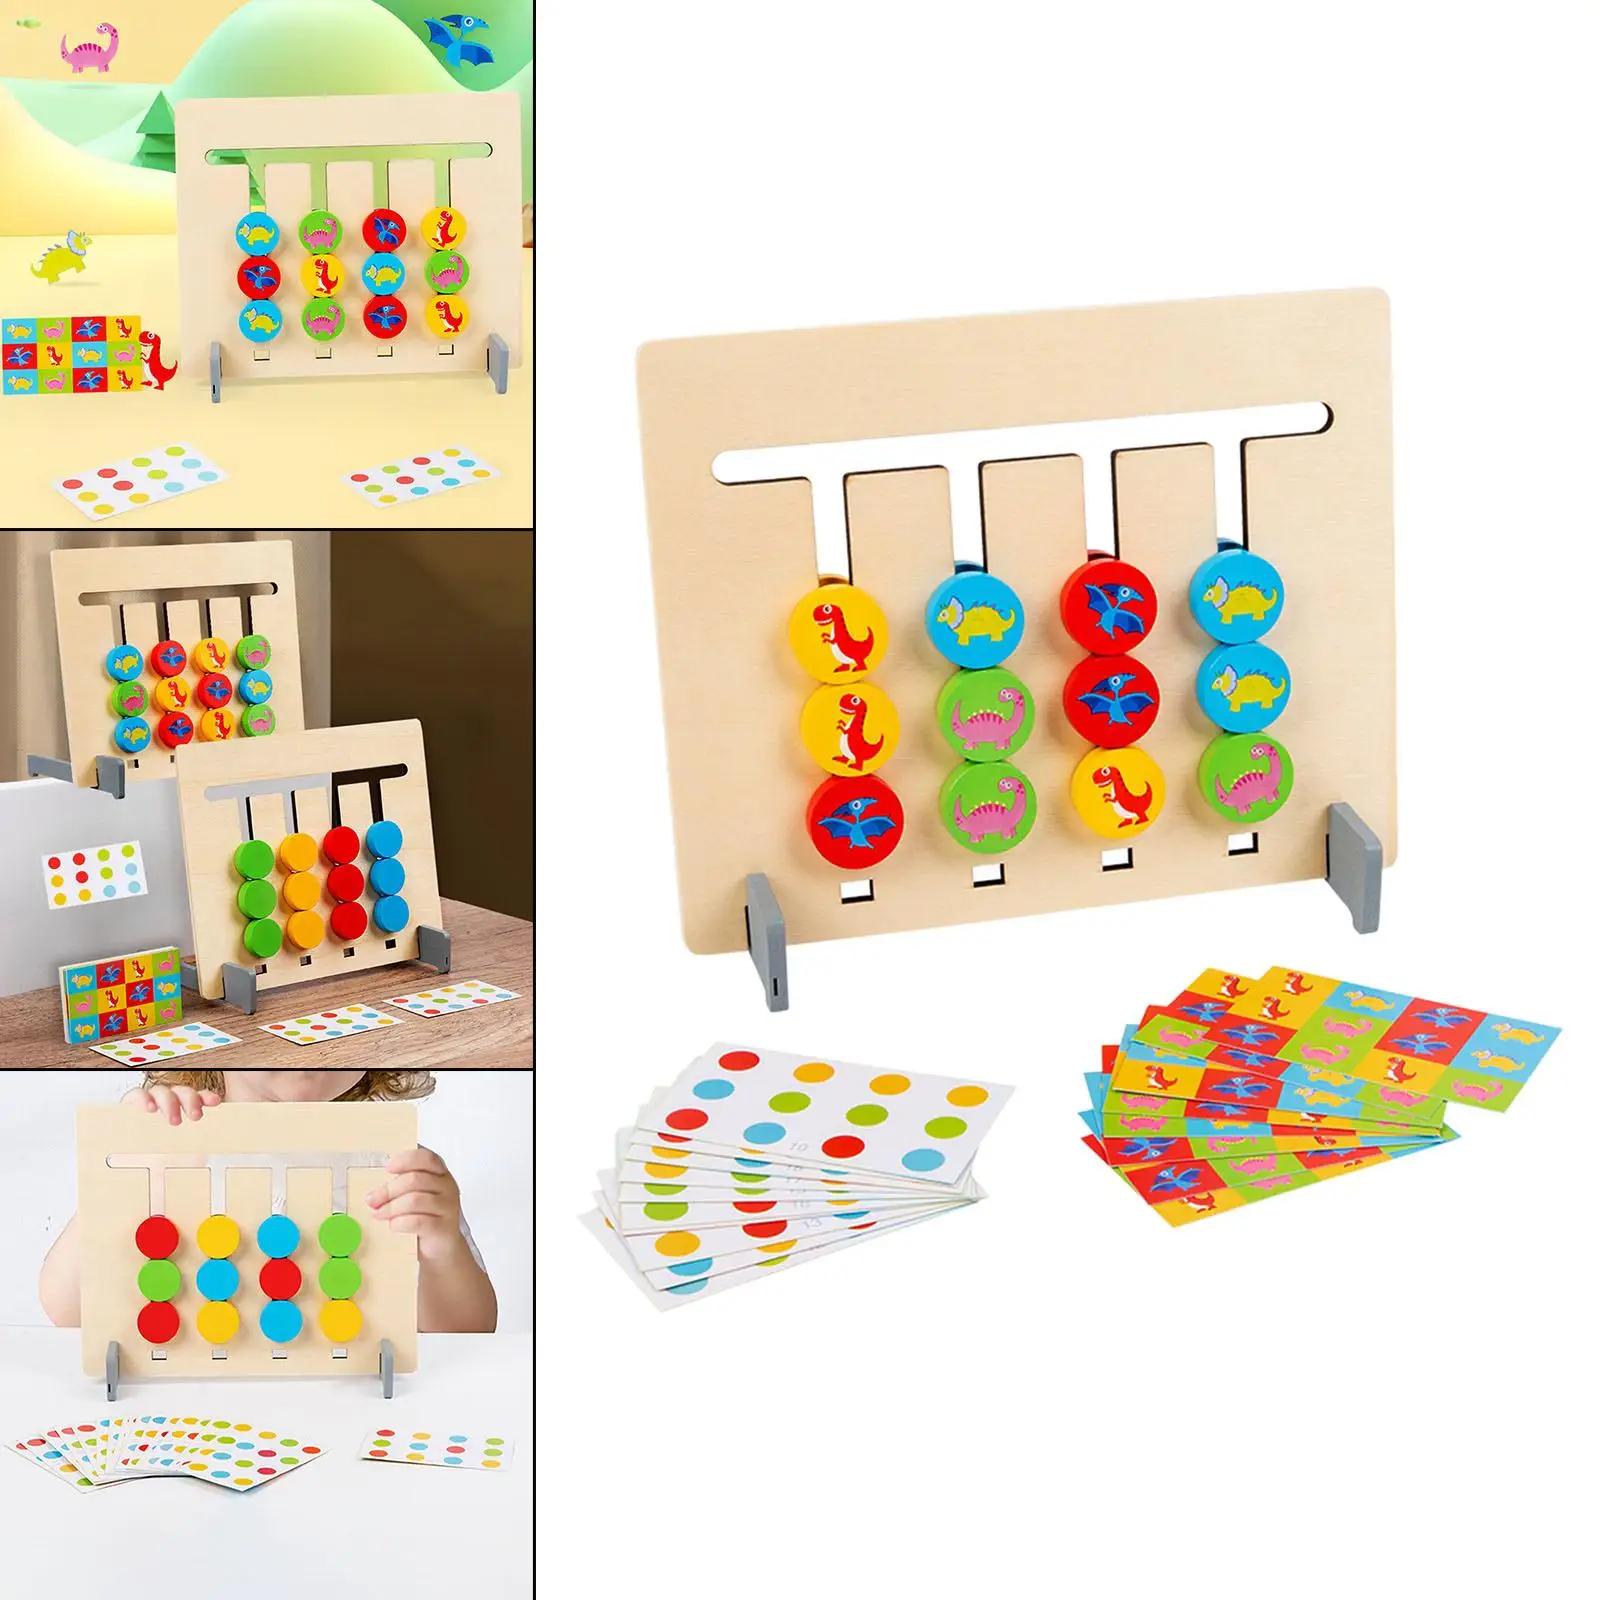 Slide Puzzle Toy Game Developing Educational Toy Wooden Board Shape Color Matching Toy Brain Teaser Jigsaw for Preschool